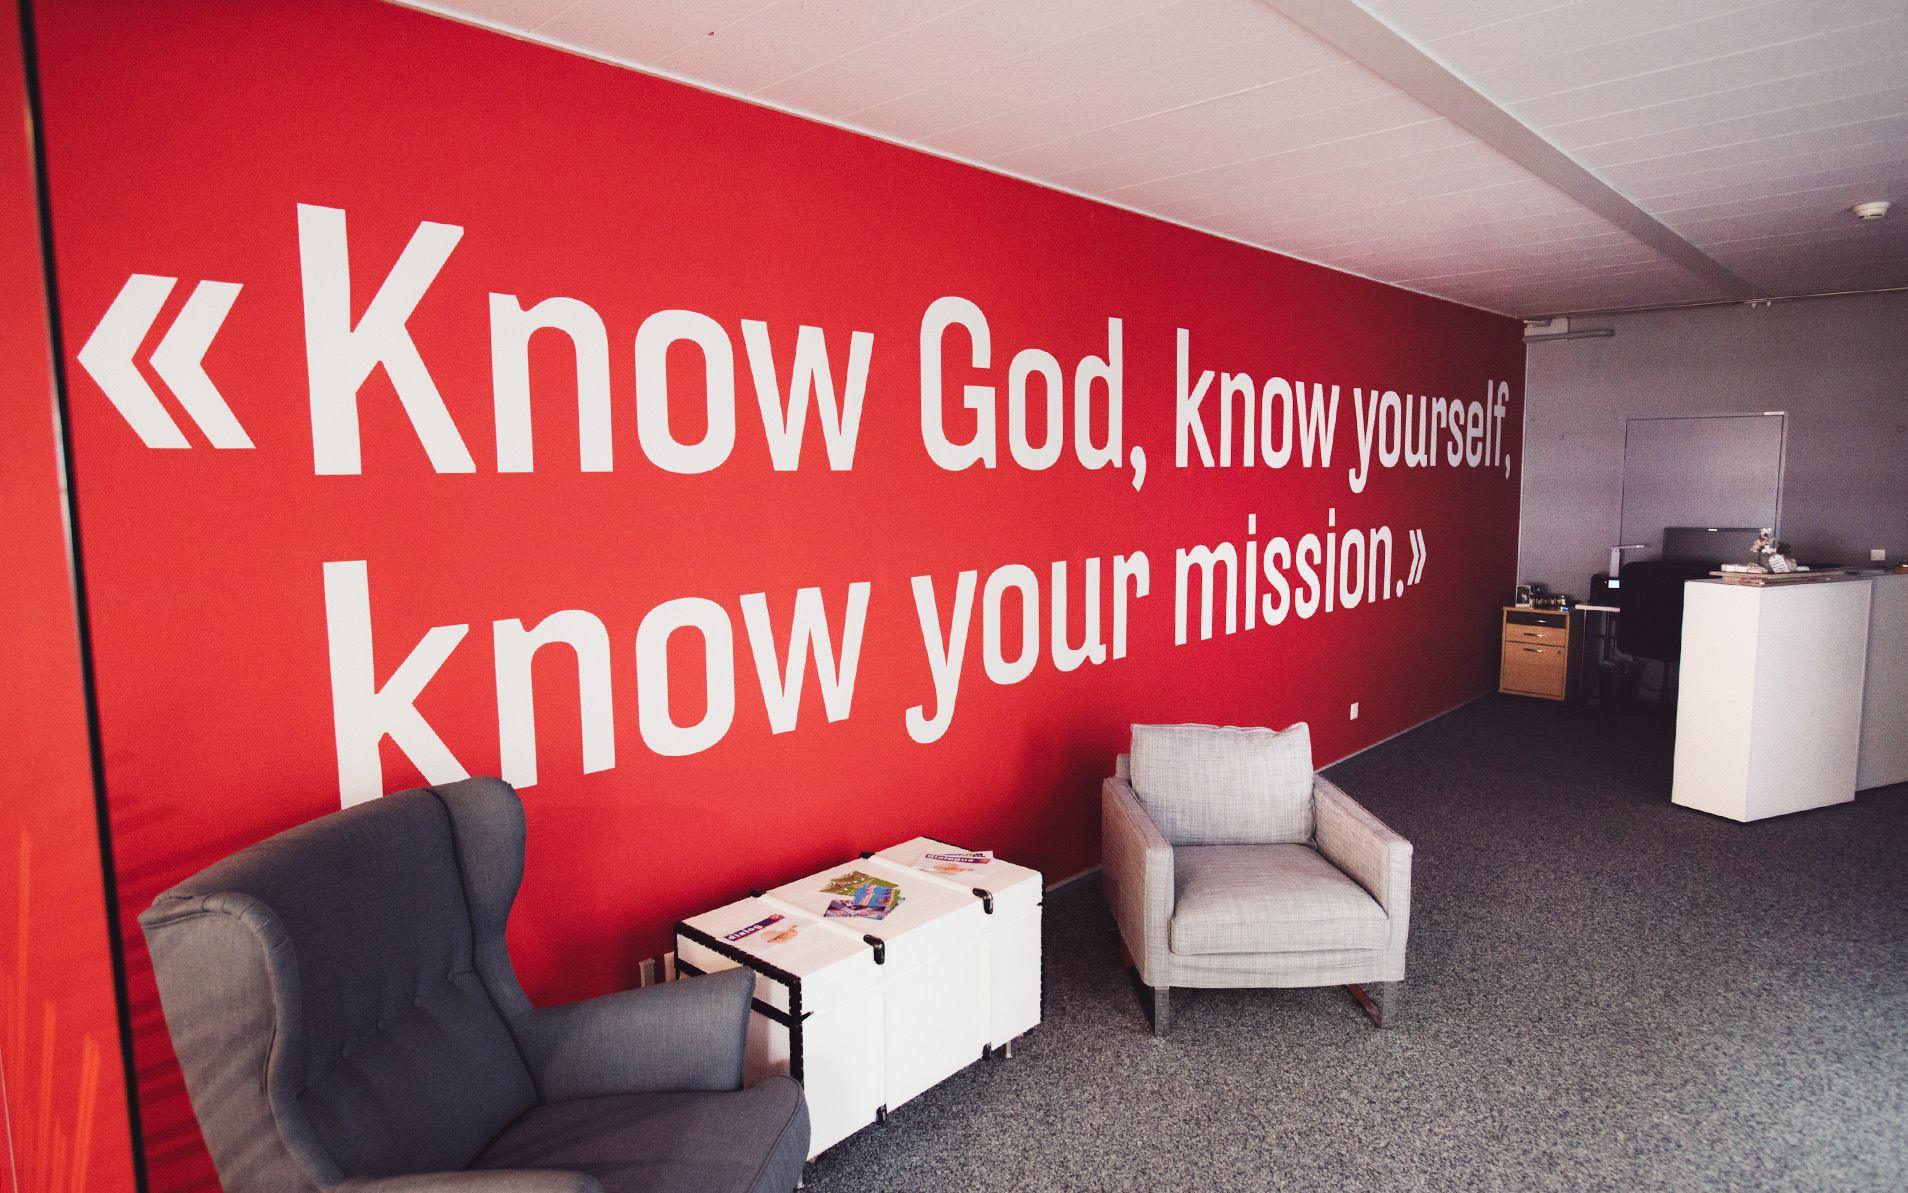 Salvation Army Learning Center Know God, know yourself, know your mission